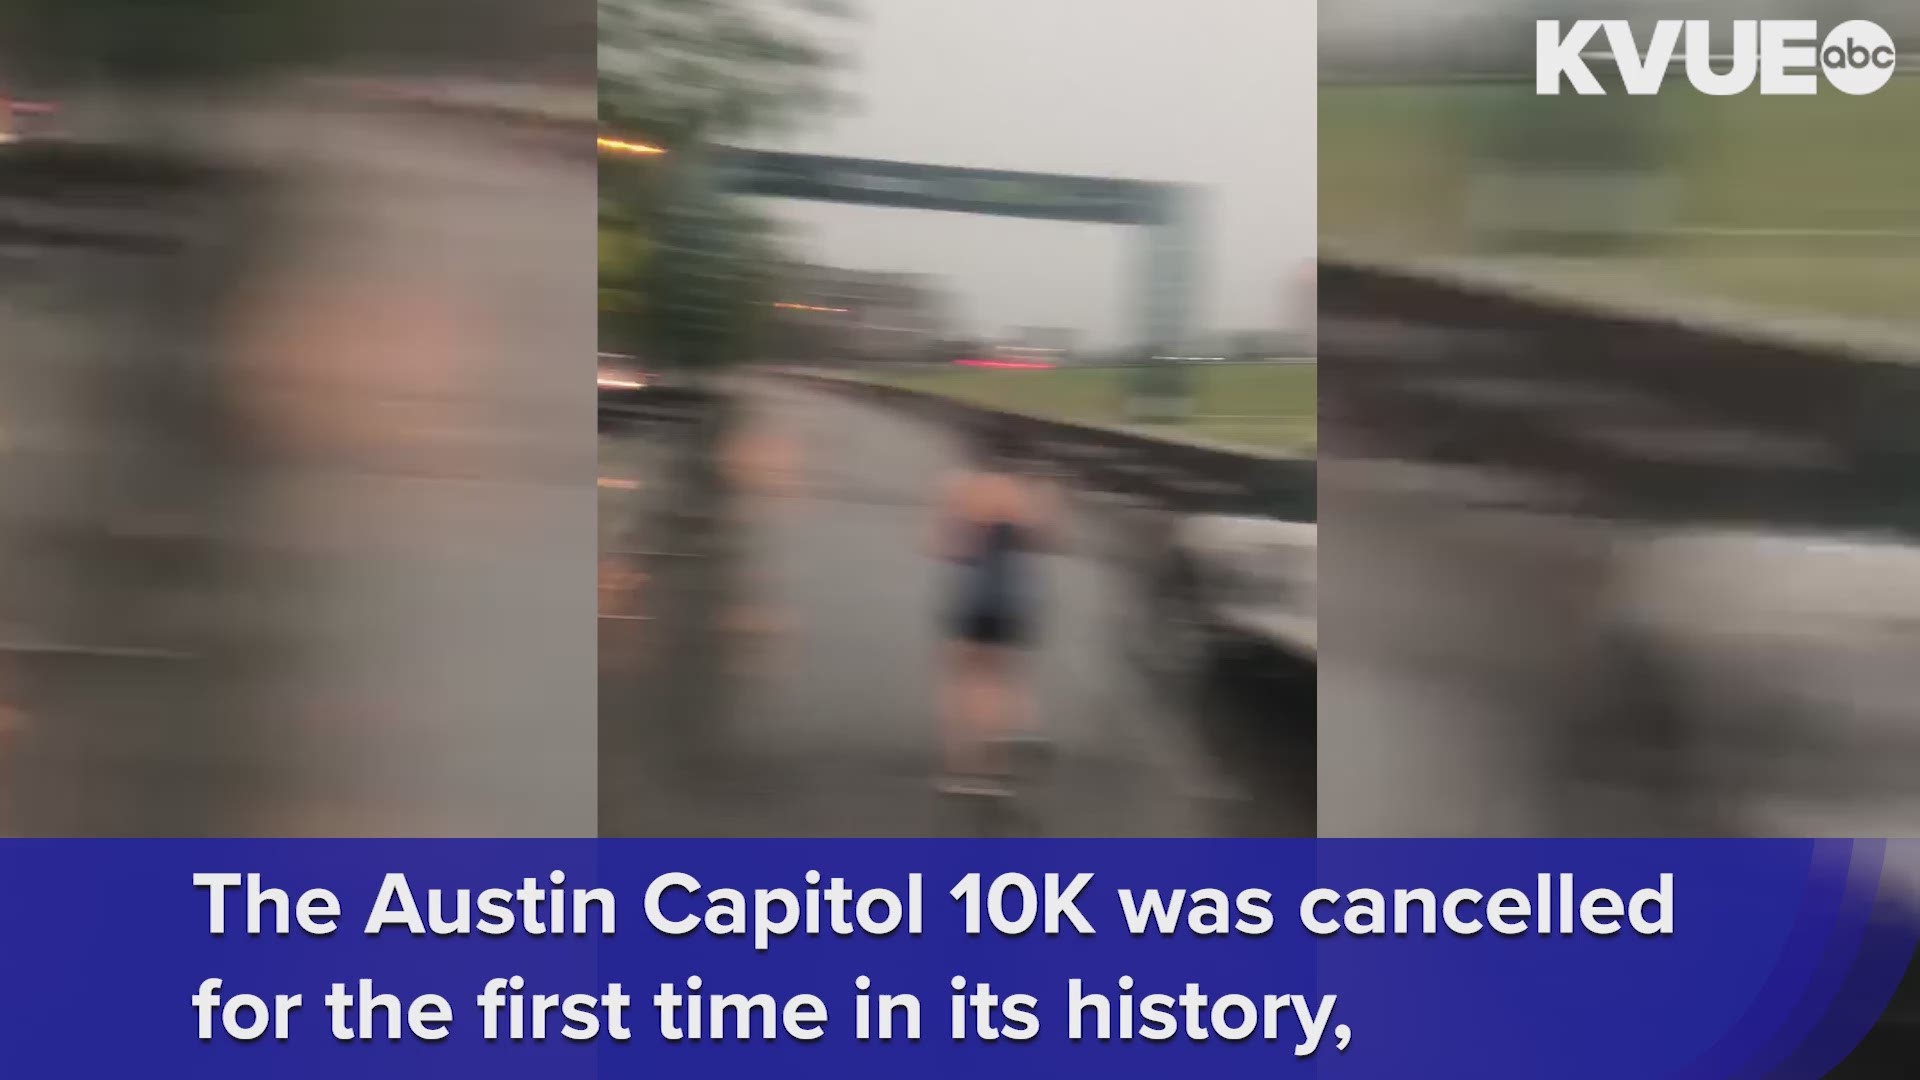 The Austin Capitol 10K was cancelled for the first time in decades. That didn't stop first-time runner Anna Balthazar from getting through the finish line.